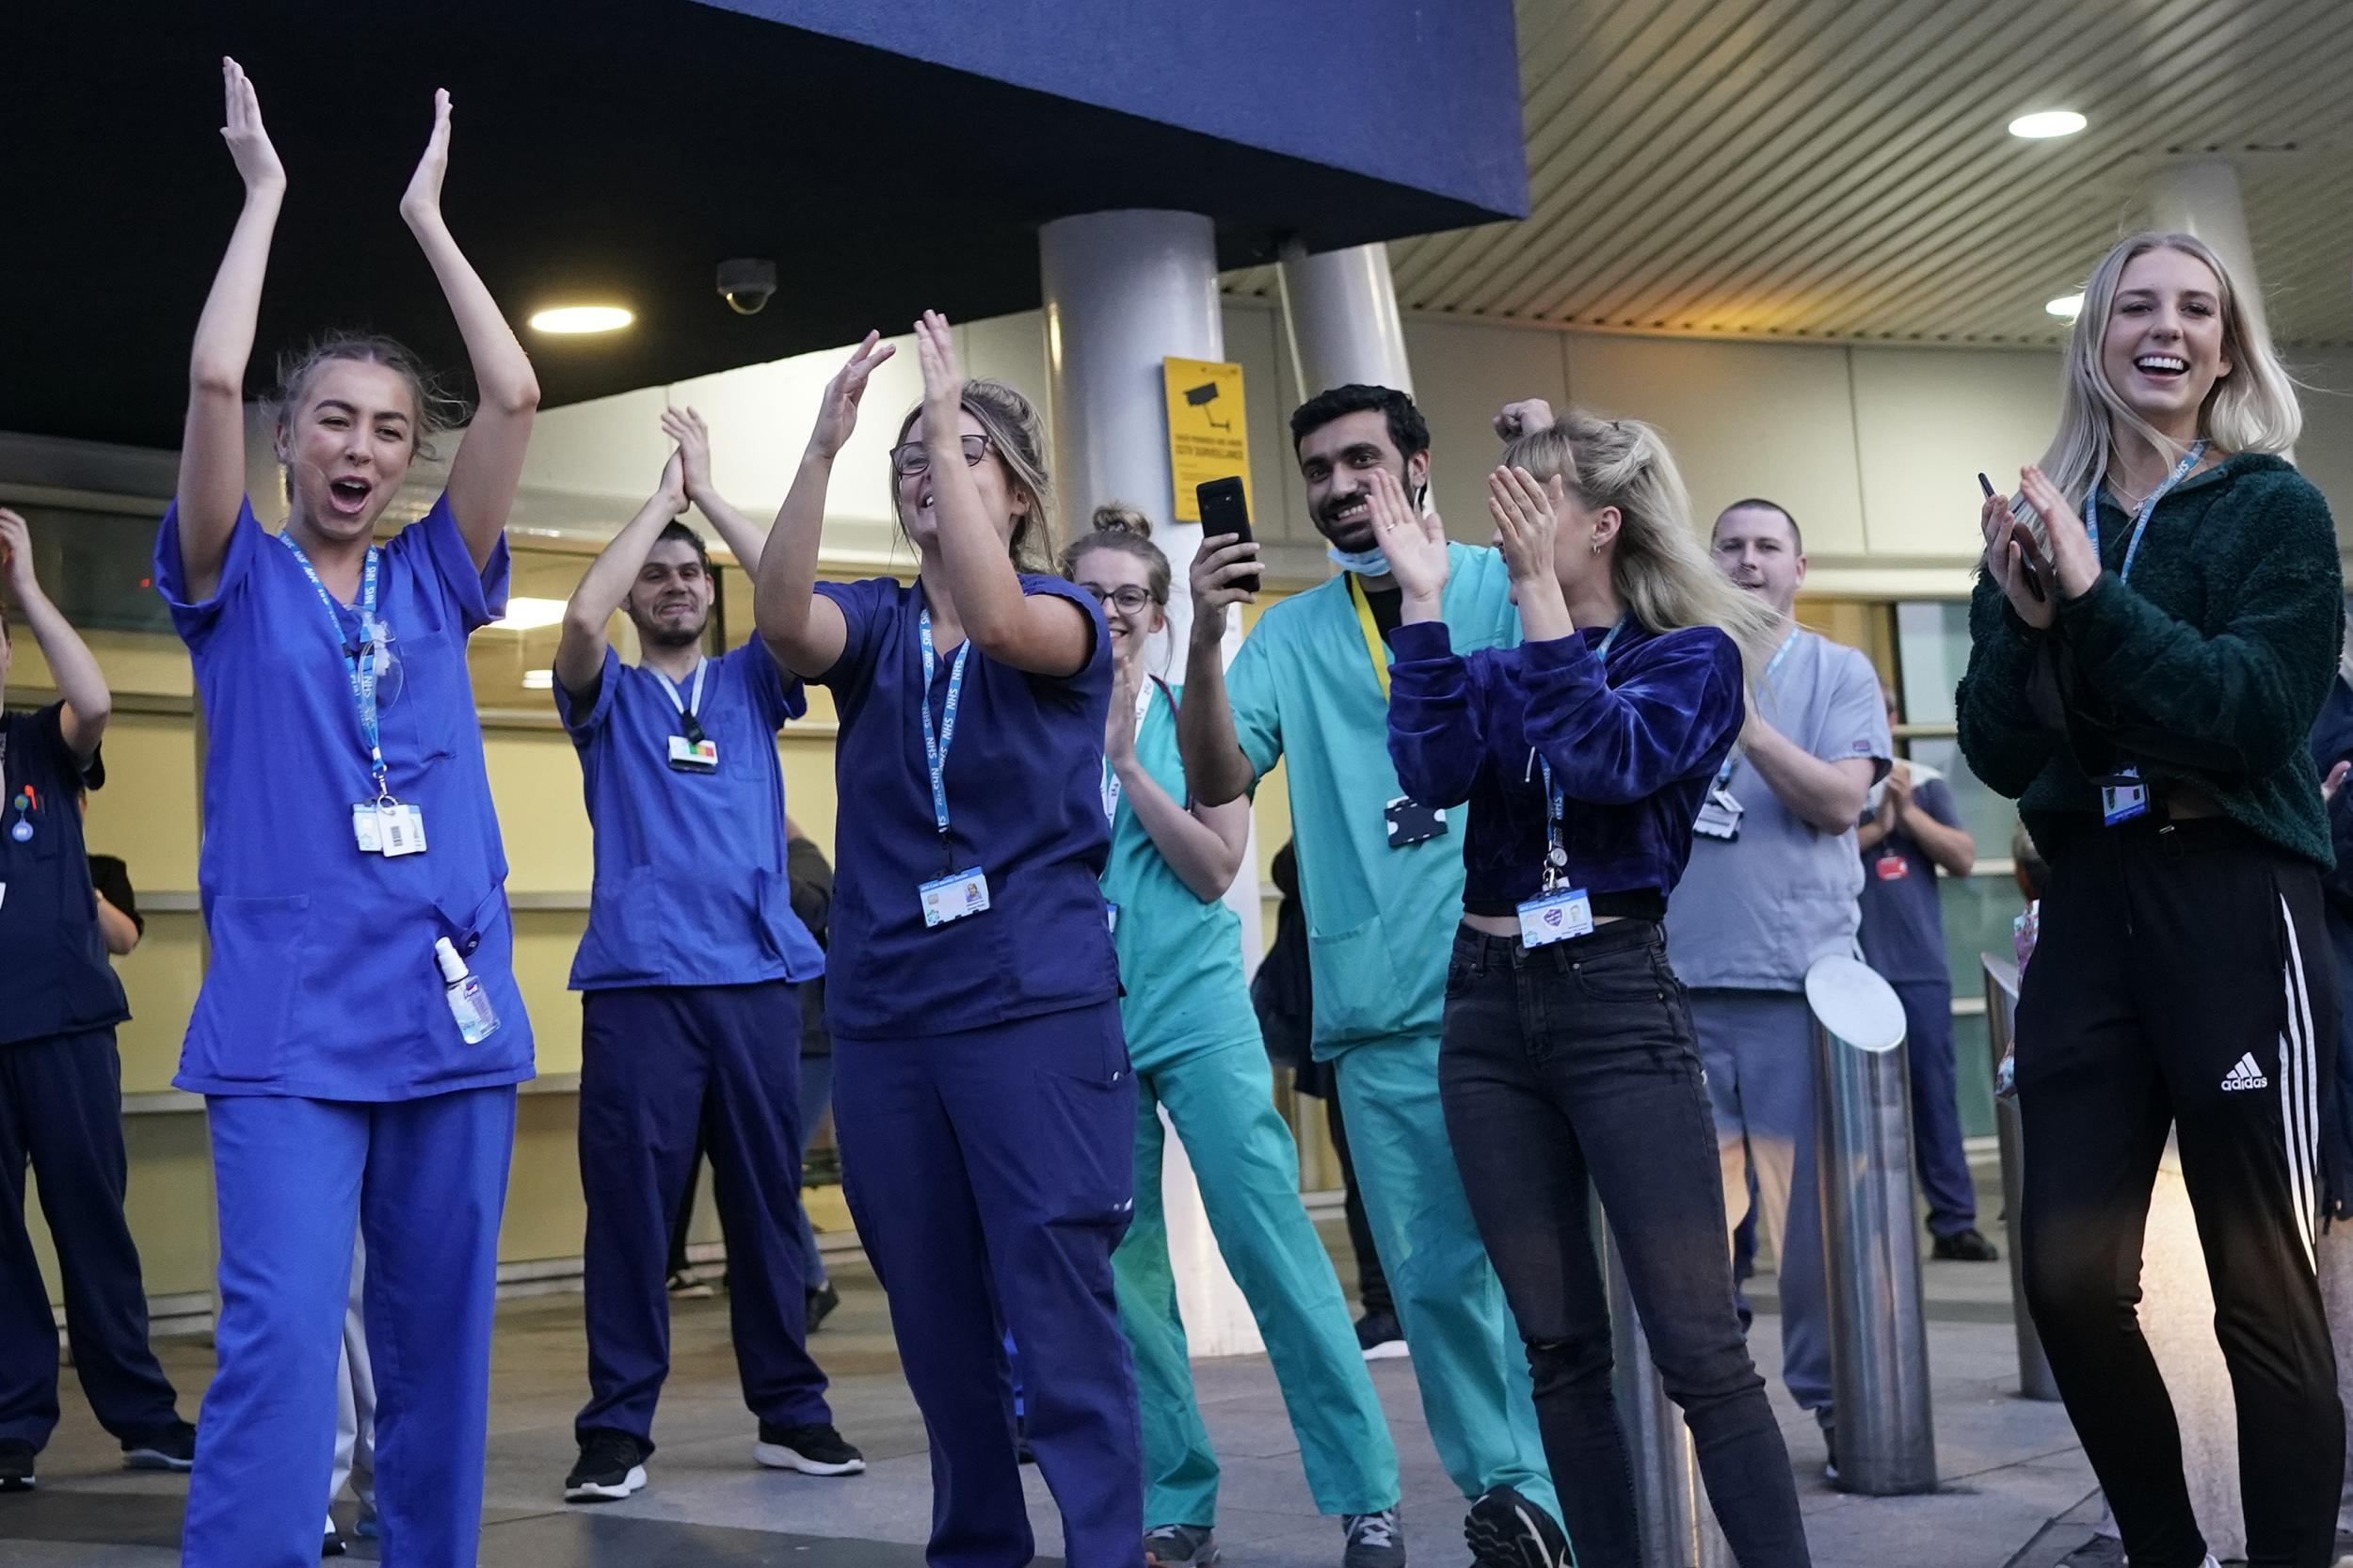 NHS staff applaud themselves and their colleagues at the entrance of the Royal Liverpool Hospital on Thursday